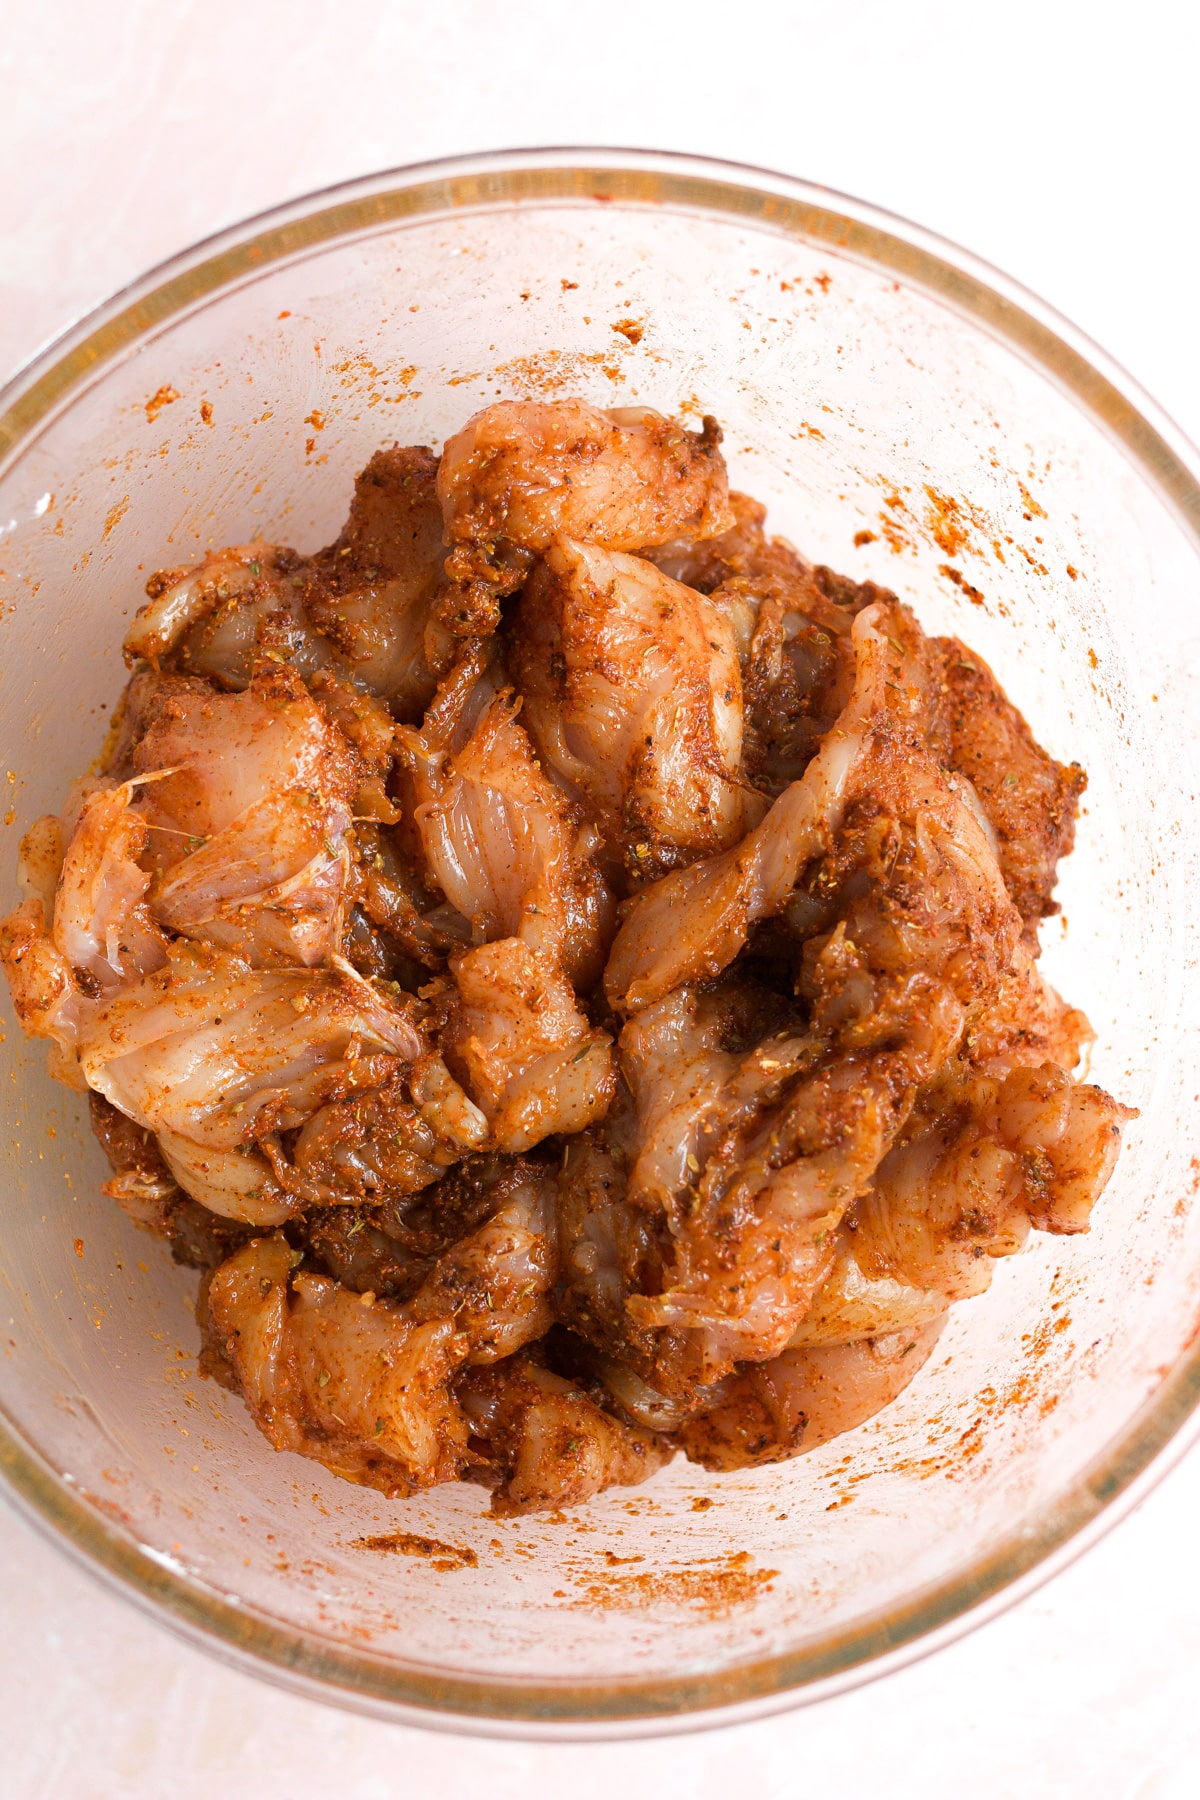 Raw chicken mixed with spices in glass bowl.